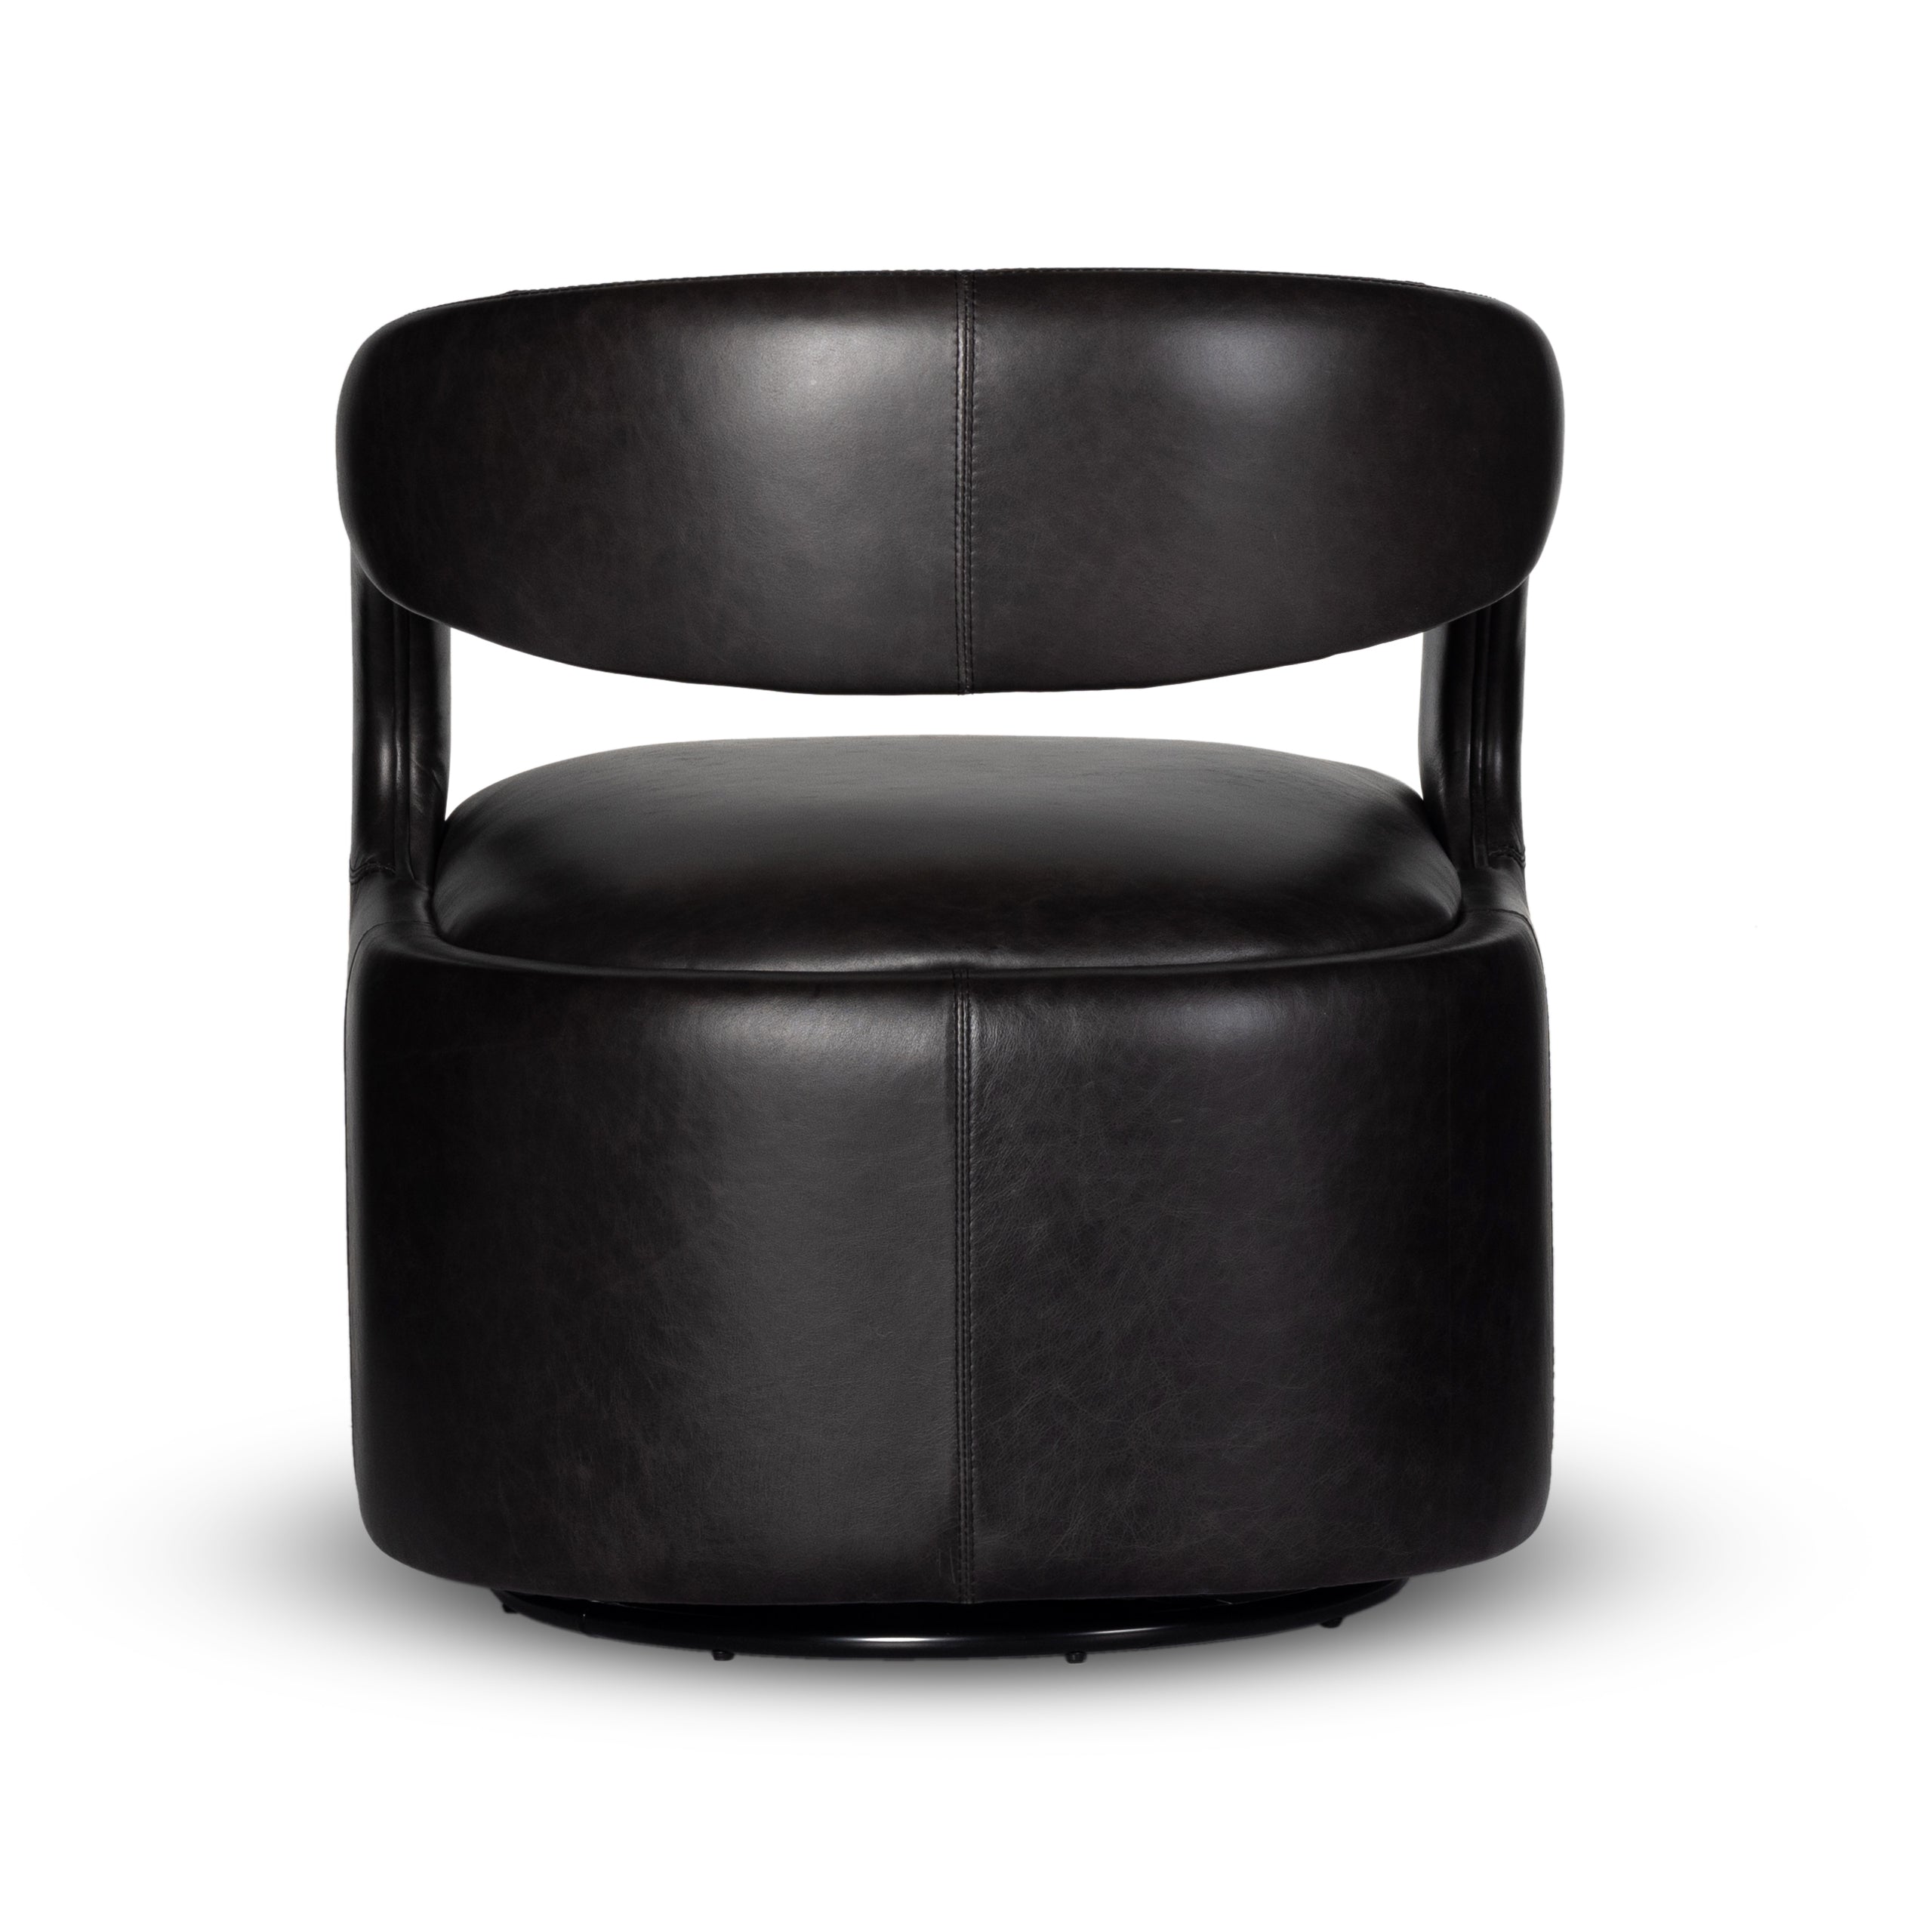 This 360-swivel update of the fan-favorite stationary design makes quite the statement. Well curved and finely sculpted, black top-grain leather exclusive to Four Hands makes a uniquely shapely statement in any room.Overall Dimensions: 26"w x 26"d x 29"hColors: Sonoma ButterscotchMaterials: Top Grain LeatherWeight: 51.26Volume: 13. Amethyst Home provides interior design, new home construction design consulting, vintage area rugs, and lighting in the Newport Beach metro area.